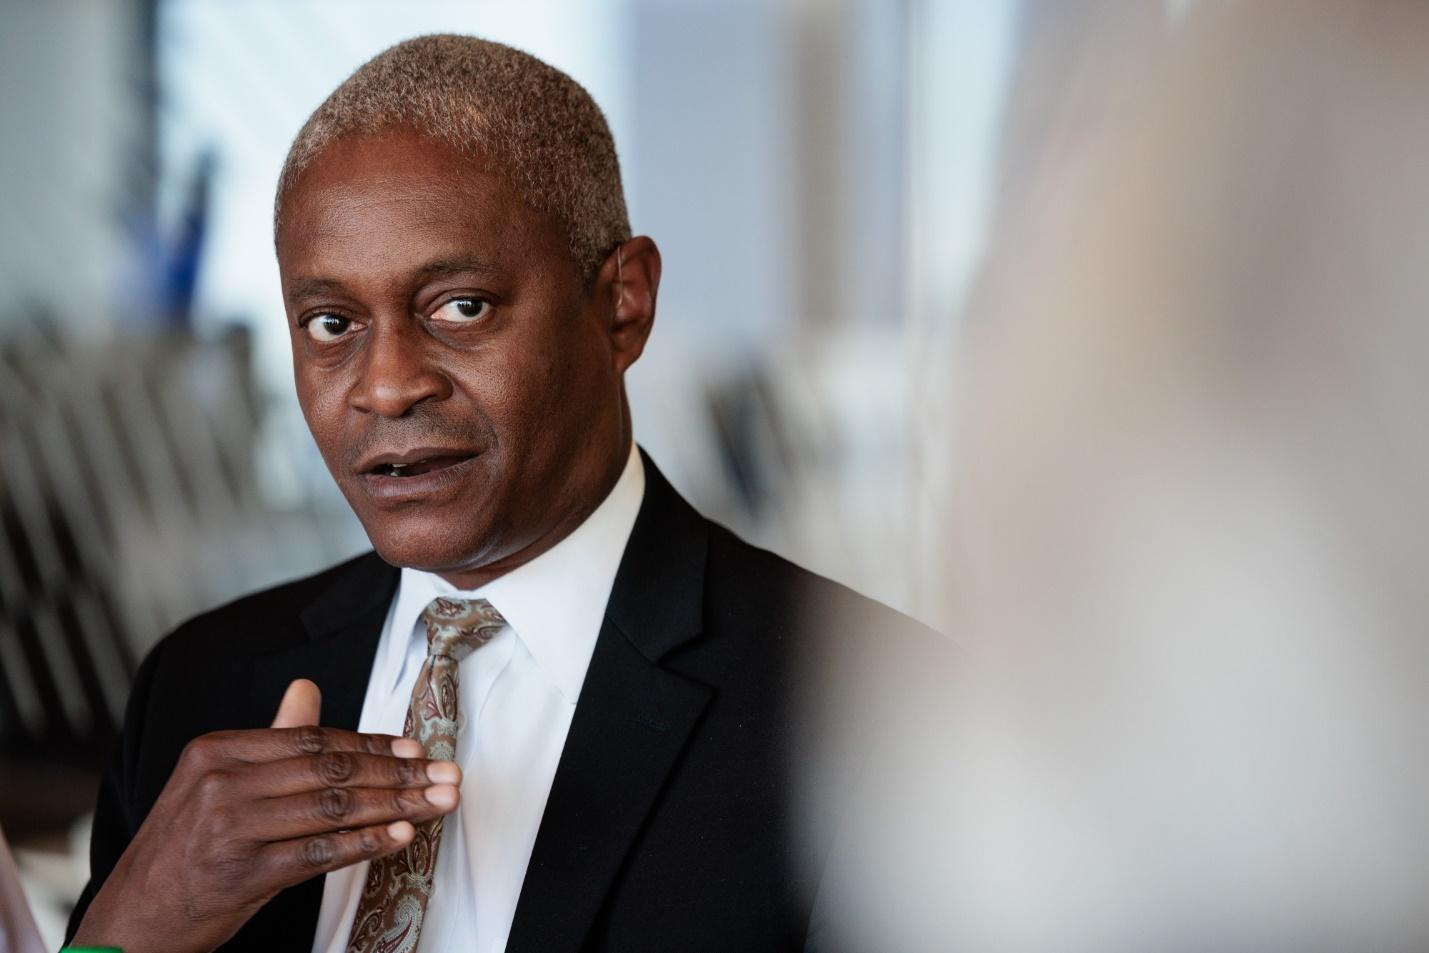 Fed's Bostic Says Evidence Points to Downward Path for Inflation - Bloomberg